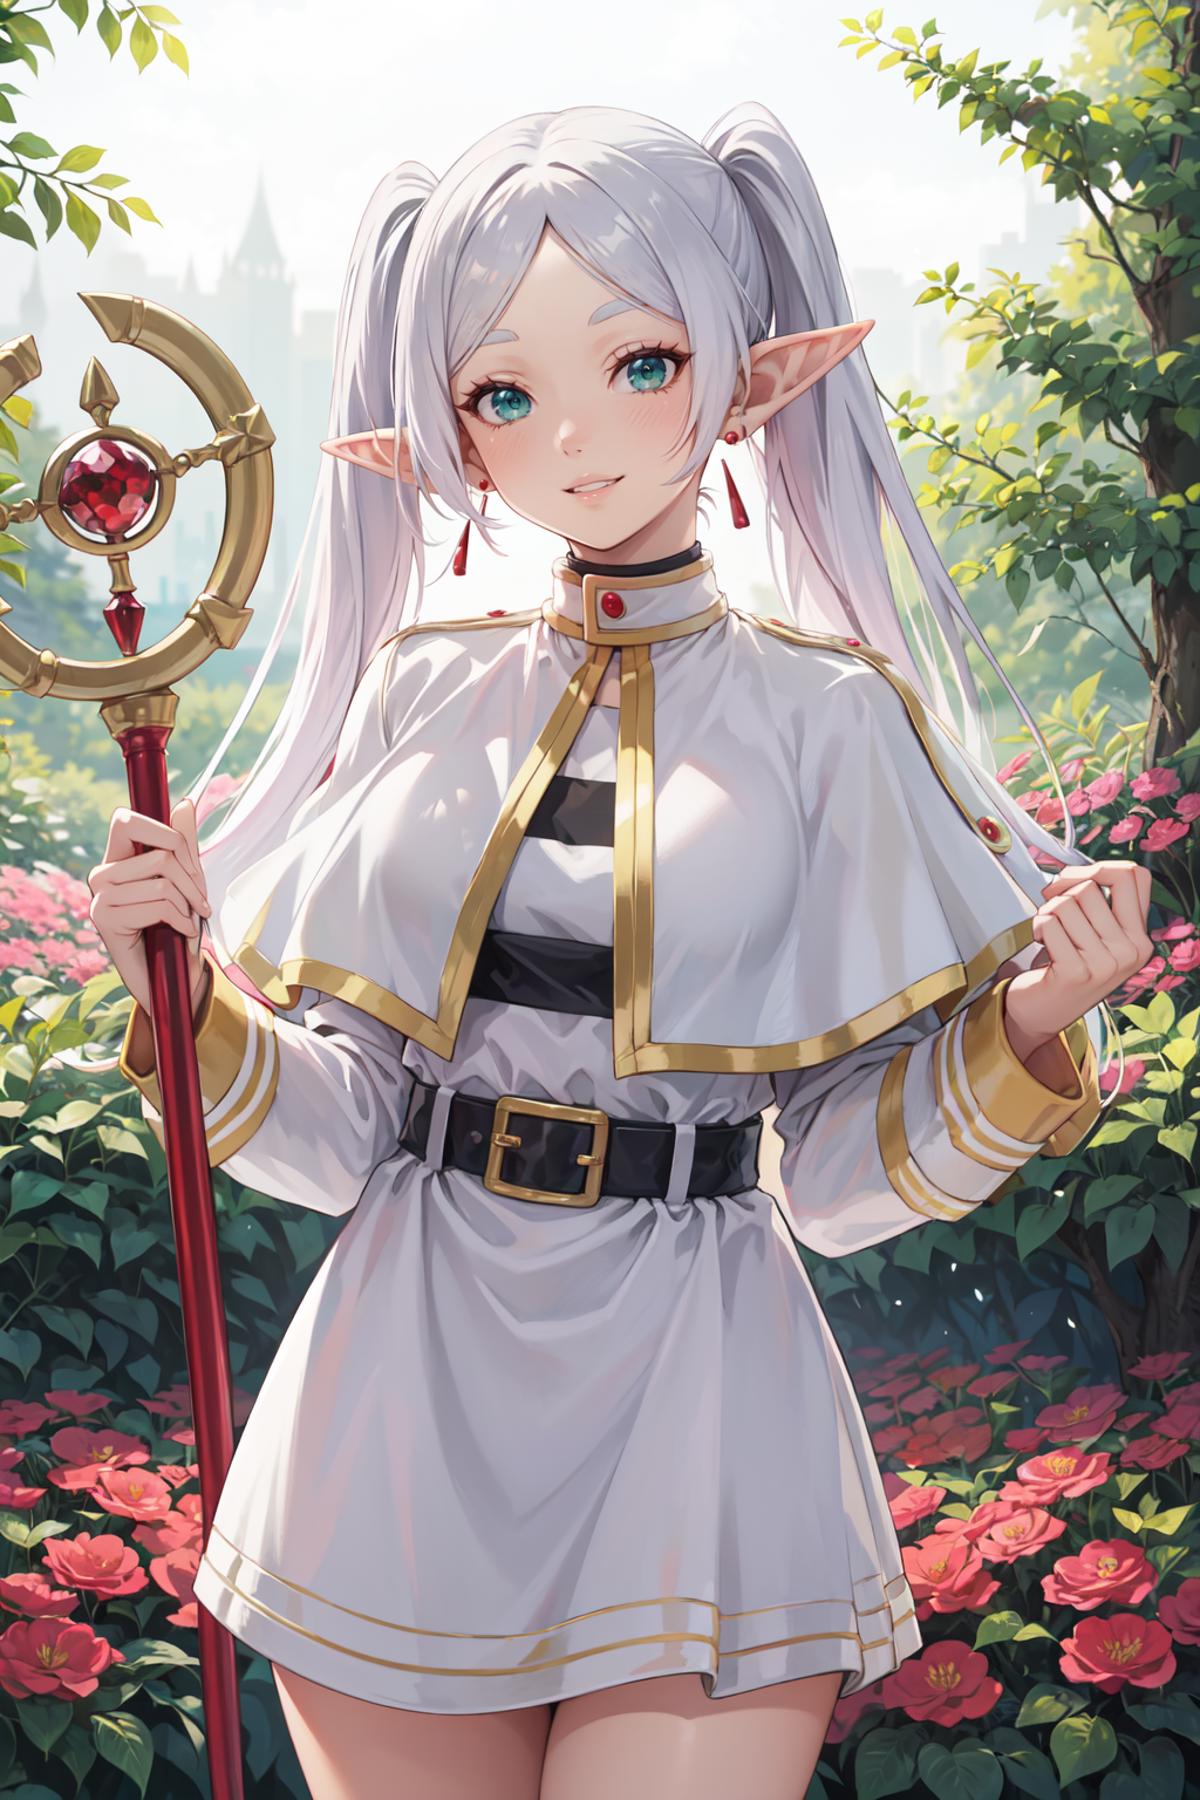 Anime-style illustration of a pretty elf girl with a red bow in her hair, wearing a white dress and holding a staff.